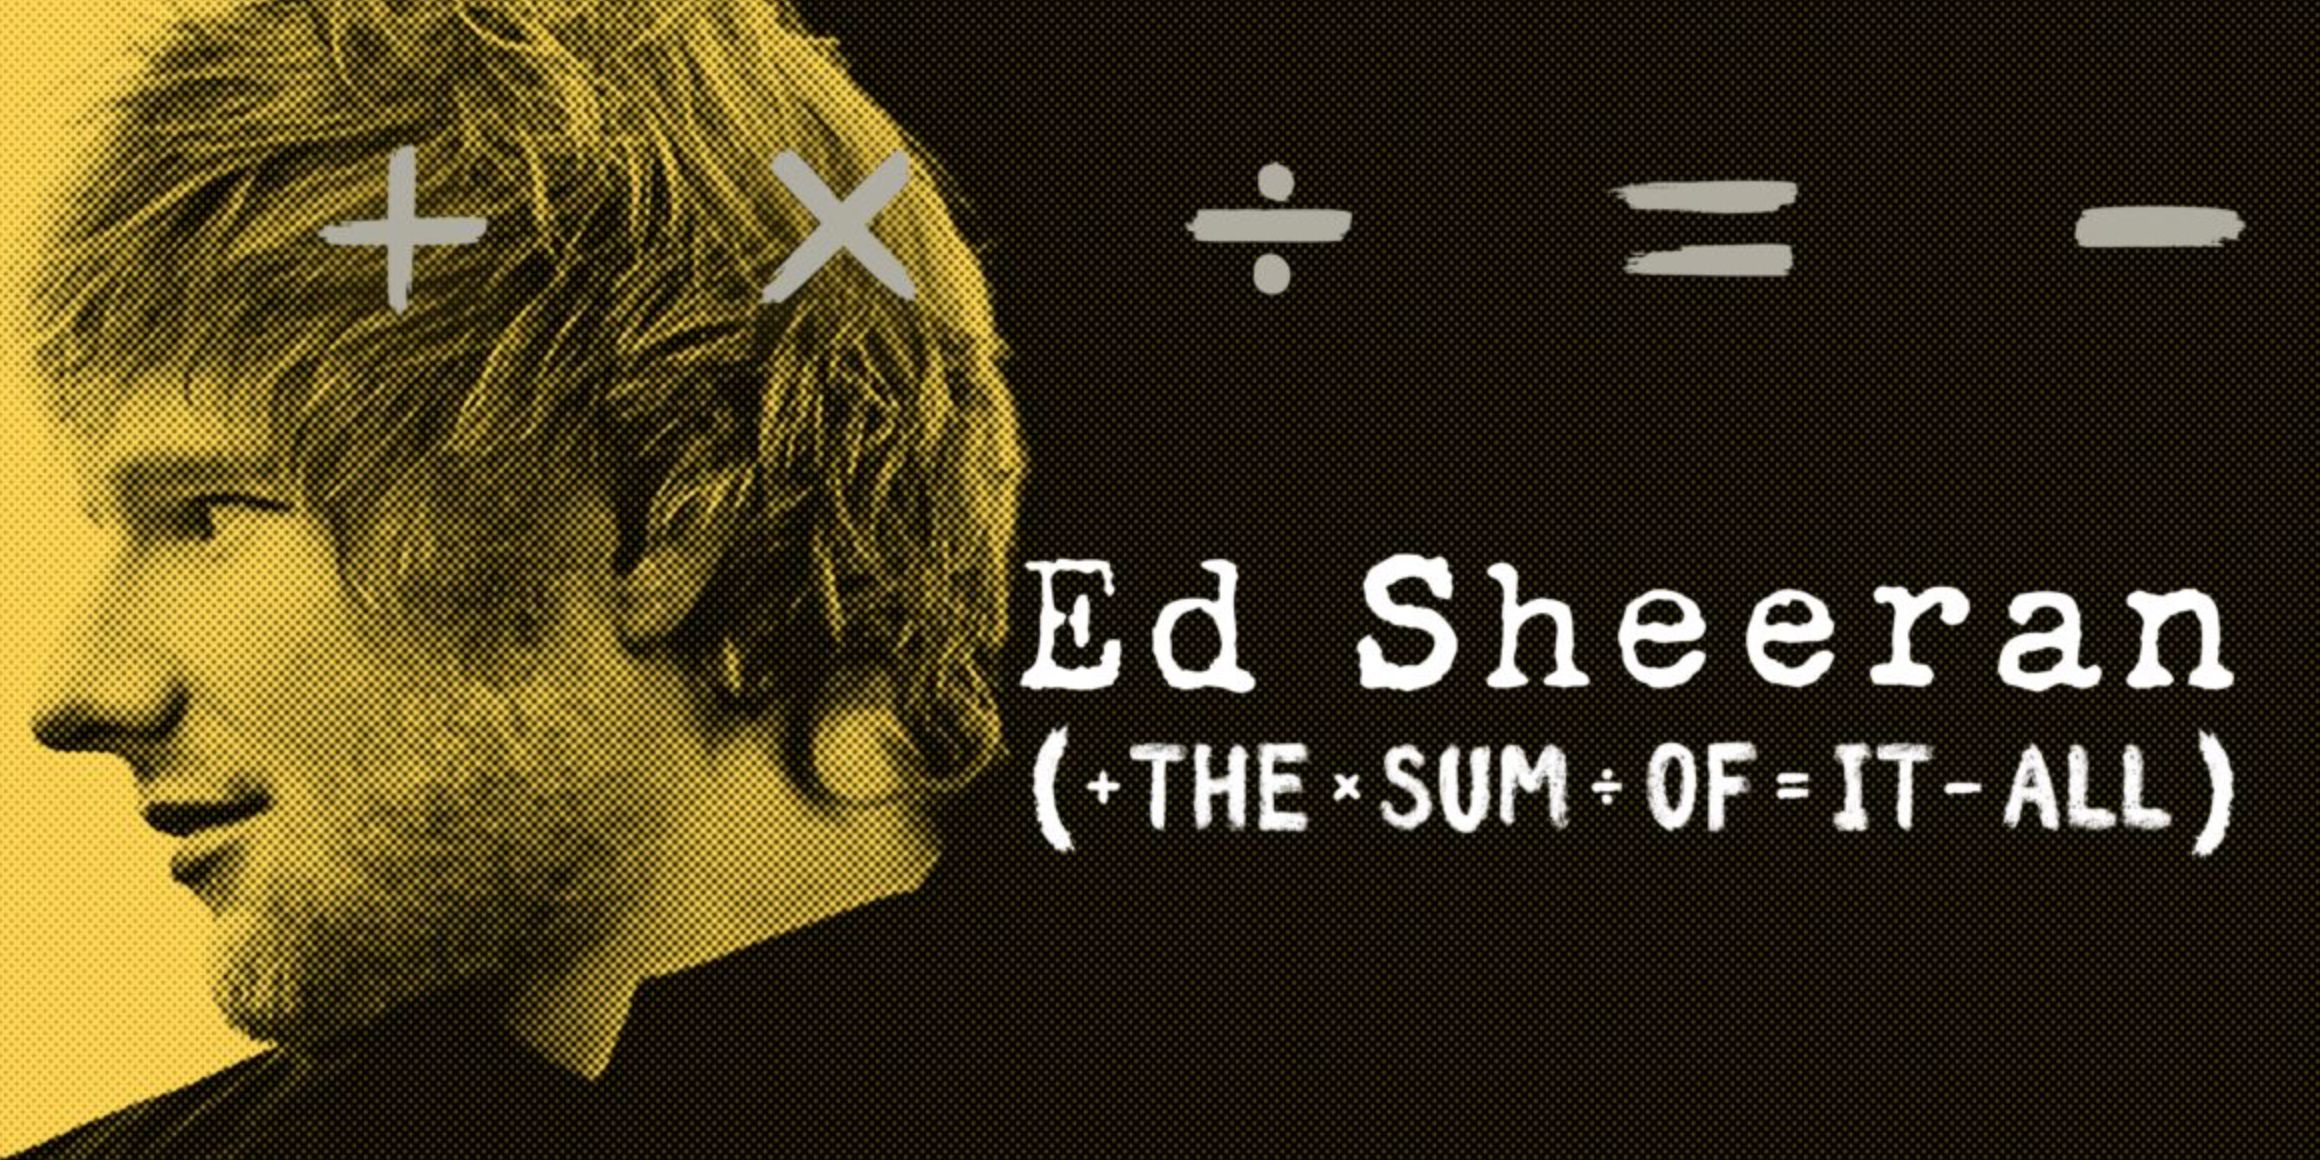 Ed Sheeran features on The Sum Of It All key art